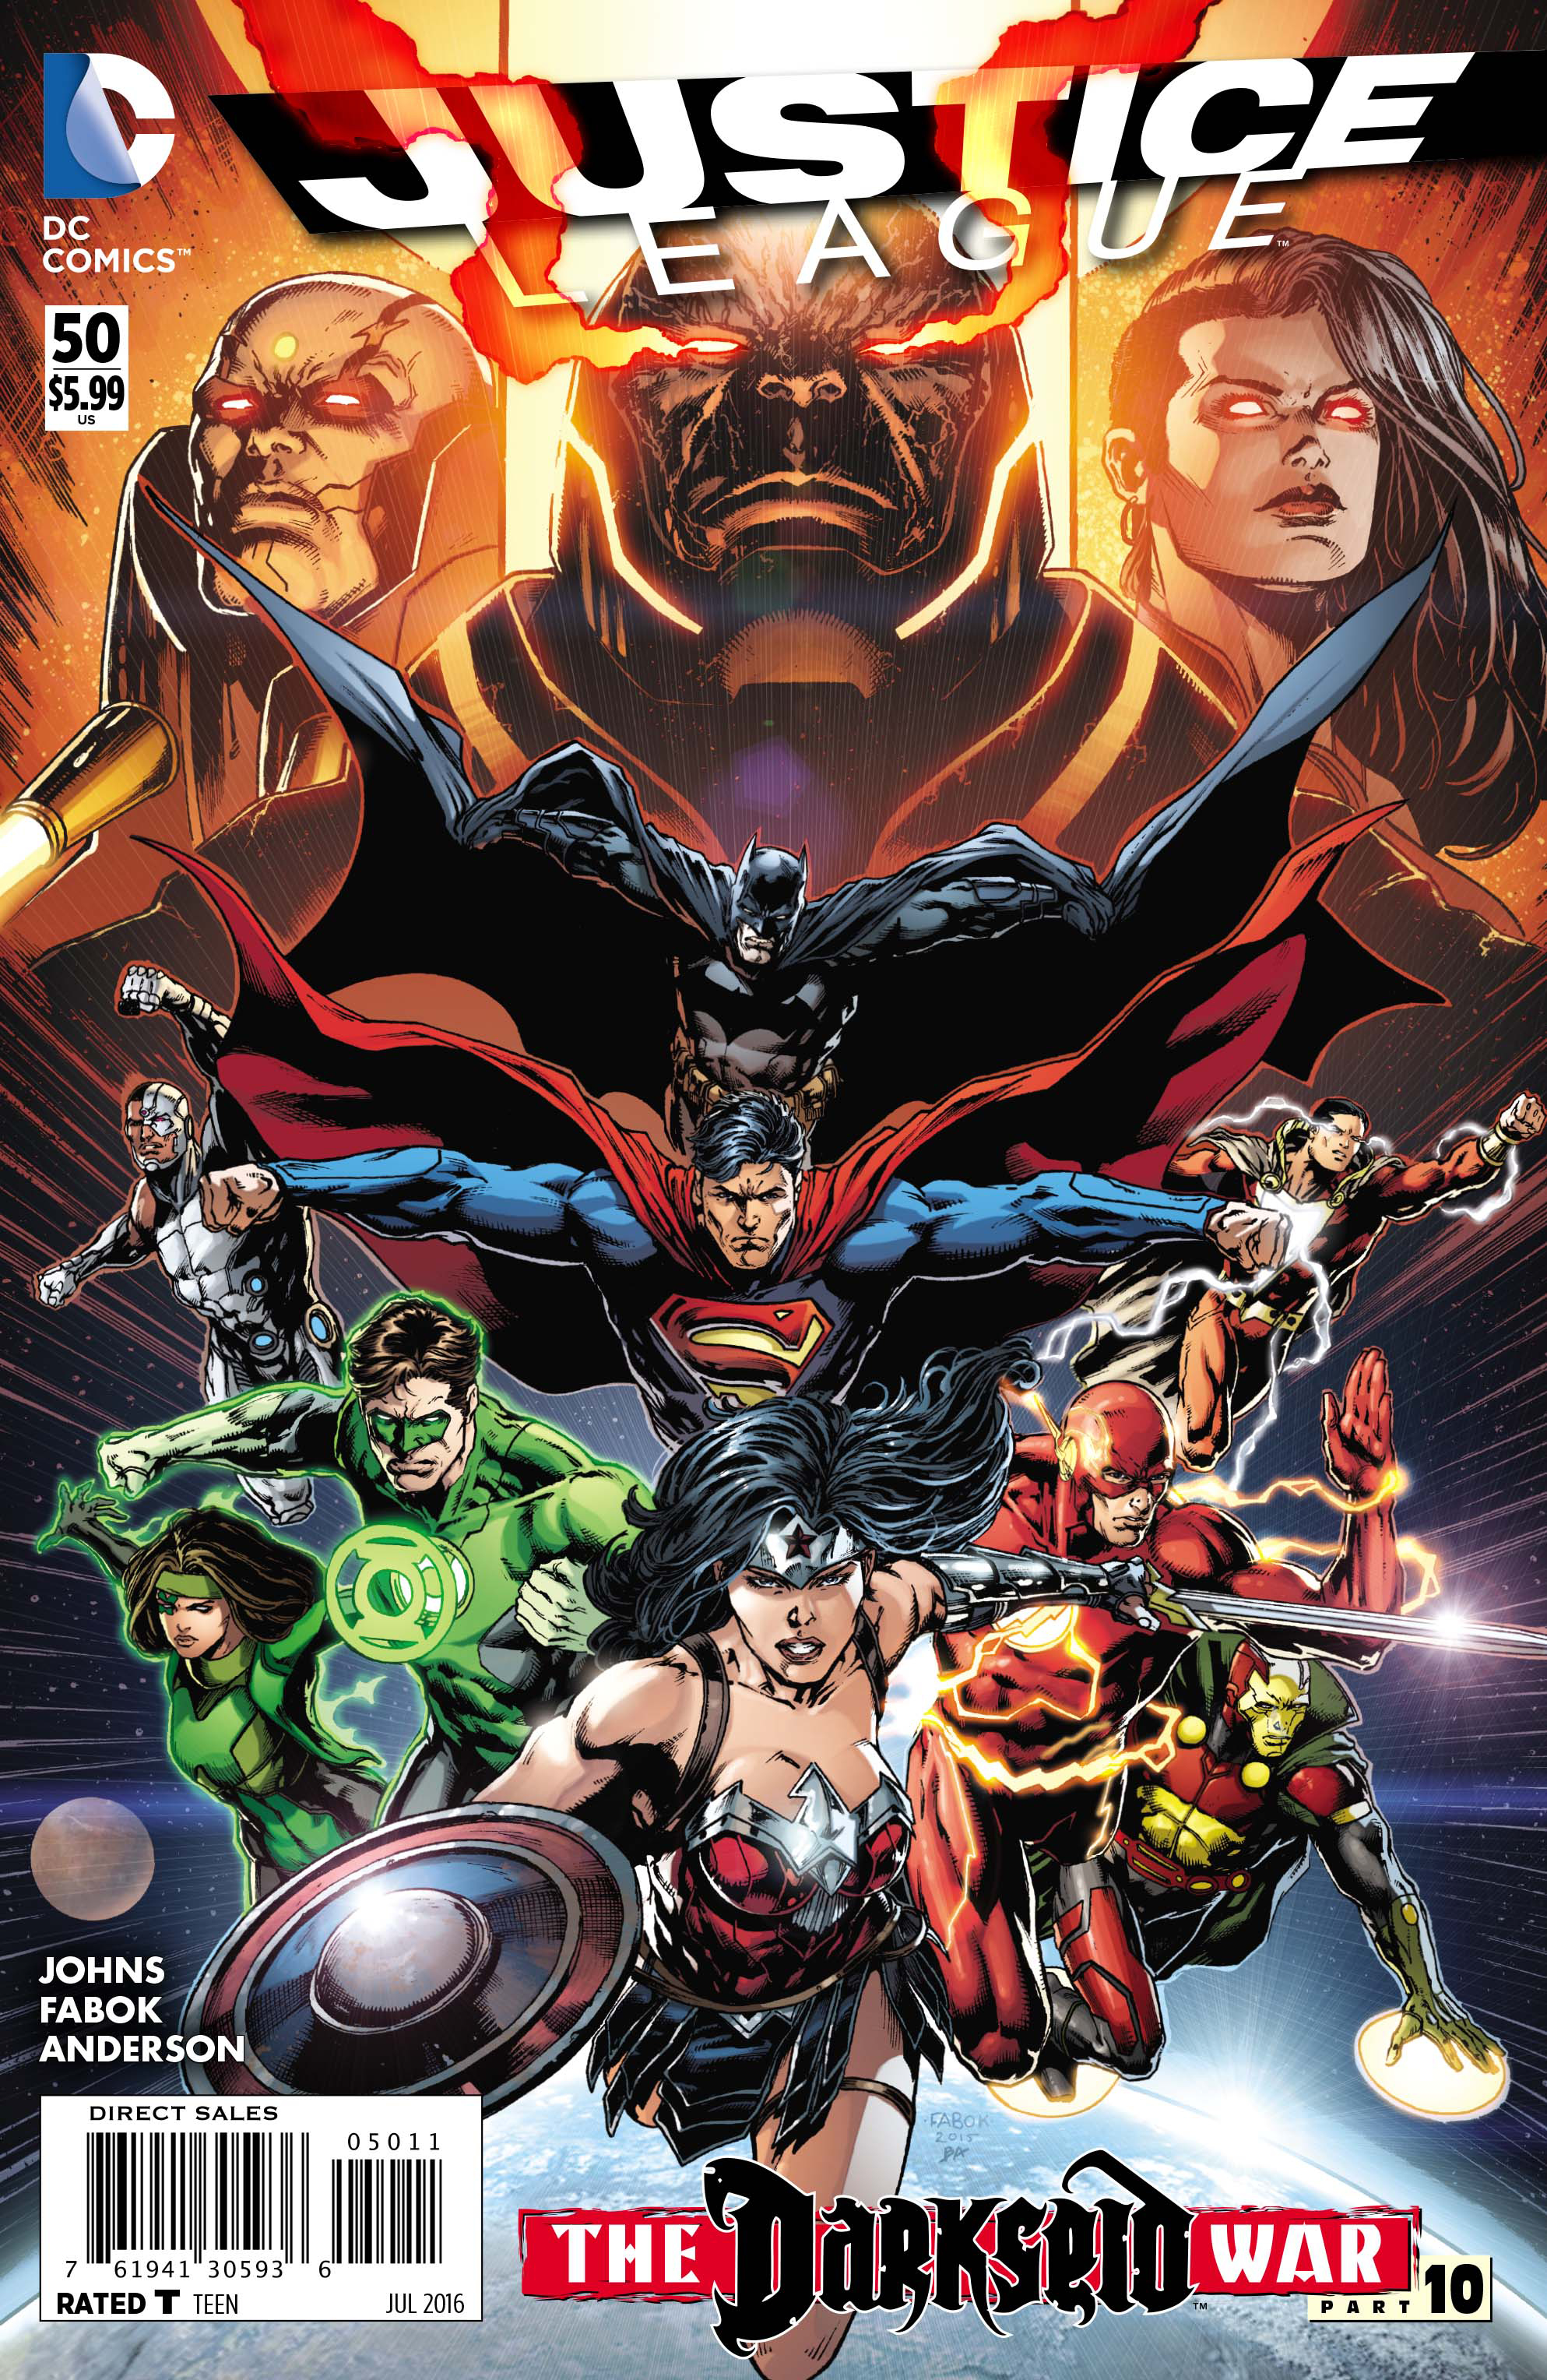 JUSTICE LEAGUE #50 (NOTE PRICE)